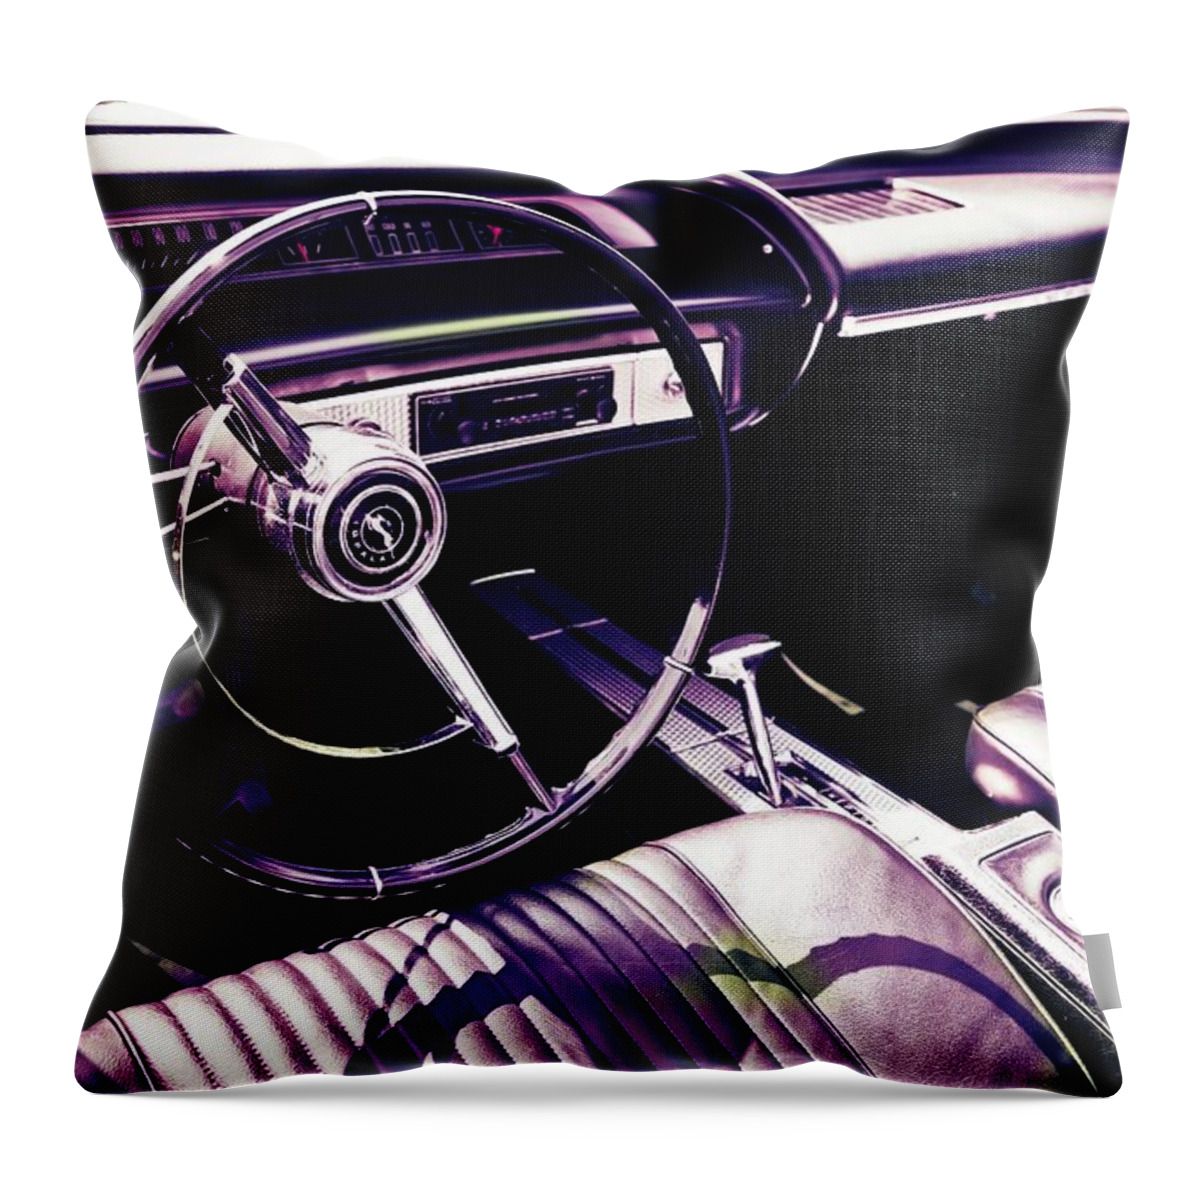 United States: Muscle: Car: Vintag: Impala: Convertible: Throw Pillow featuring the photograph Impala Convertible by Digital Art Cafe